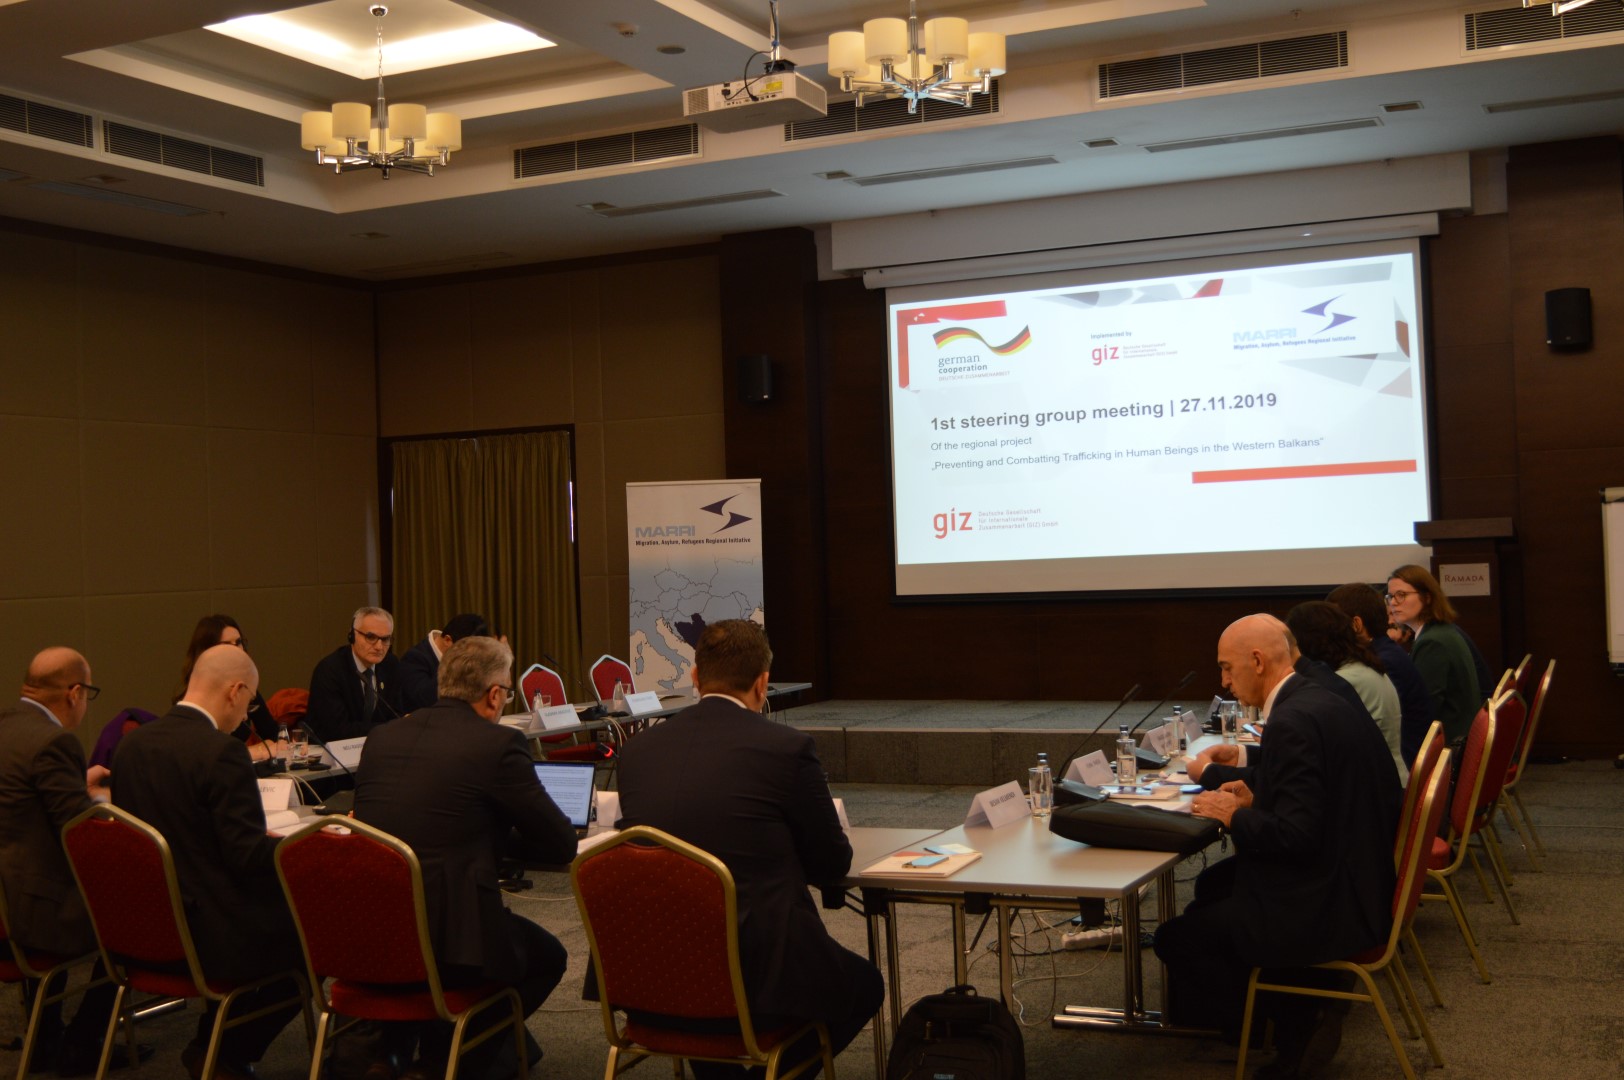 27 November 2019 – 1st Steering Group Meeting of the Regional Project on Preventing and Combatting Trafficking in Human Beings in the Western Balkans (PaCT)